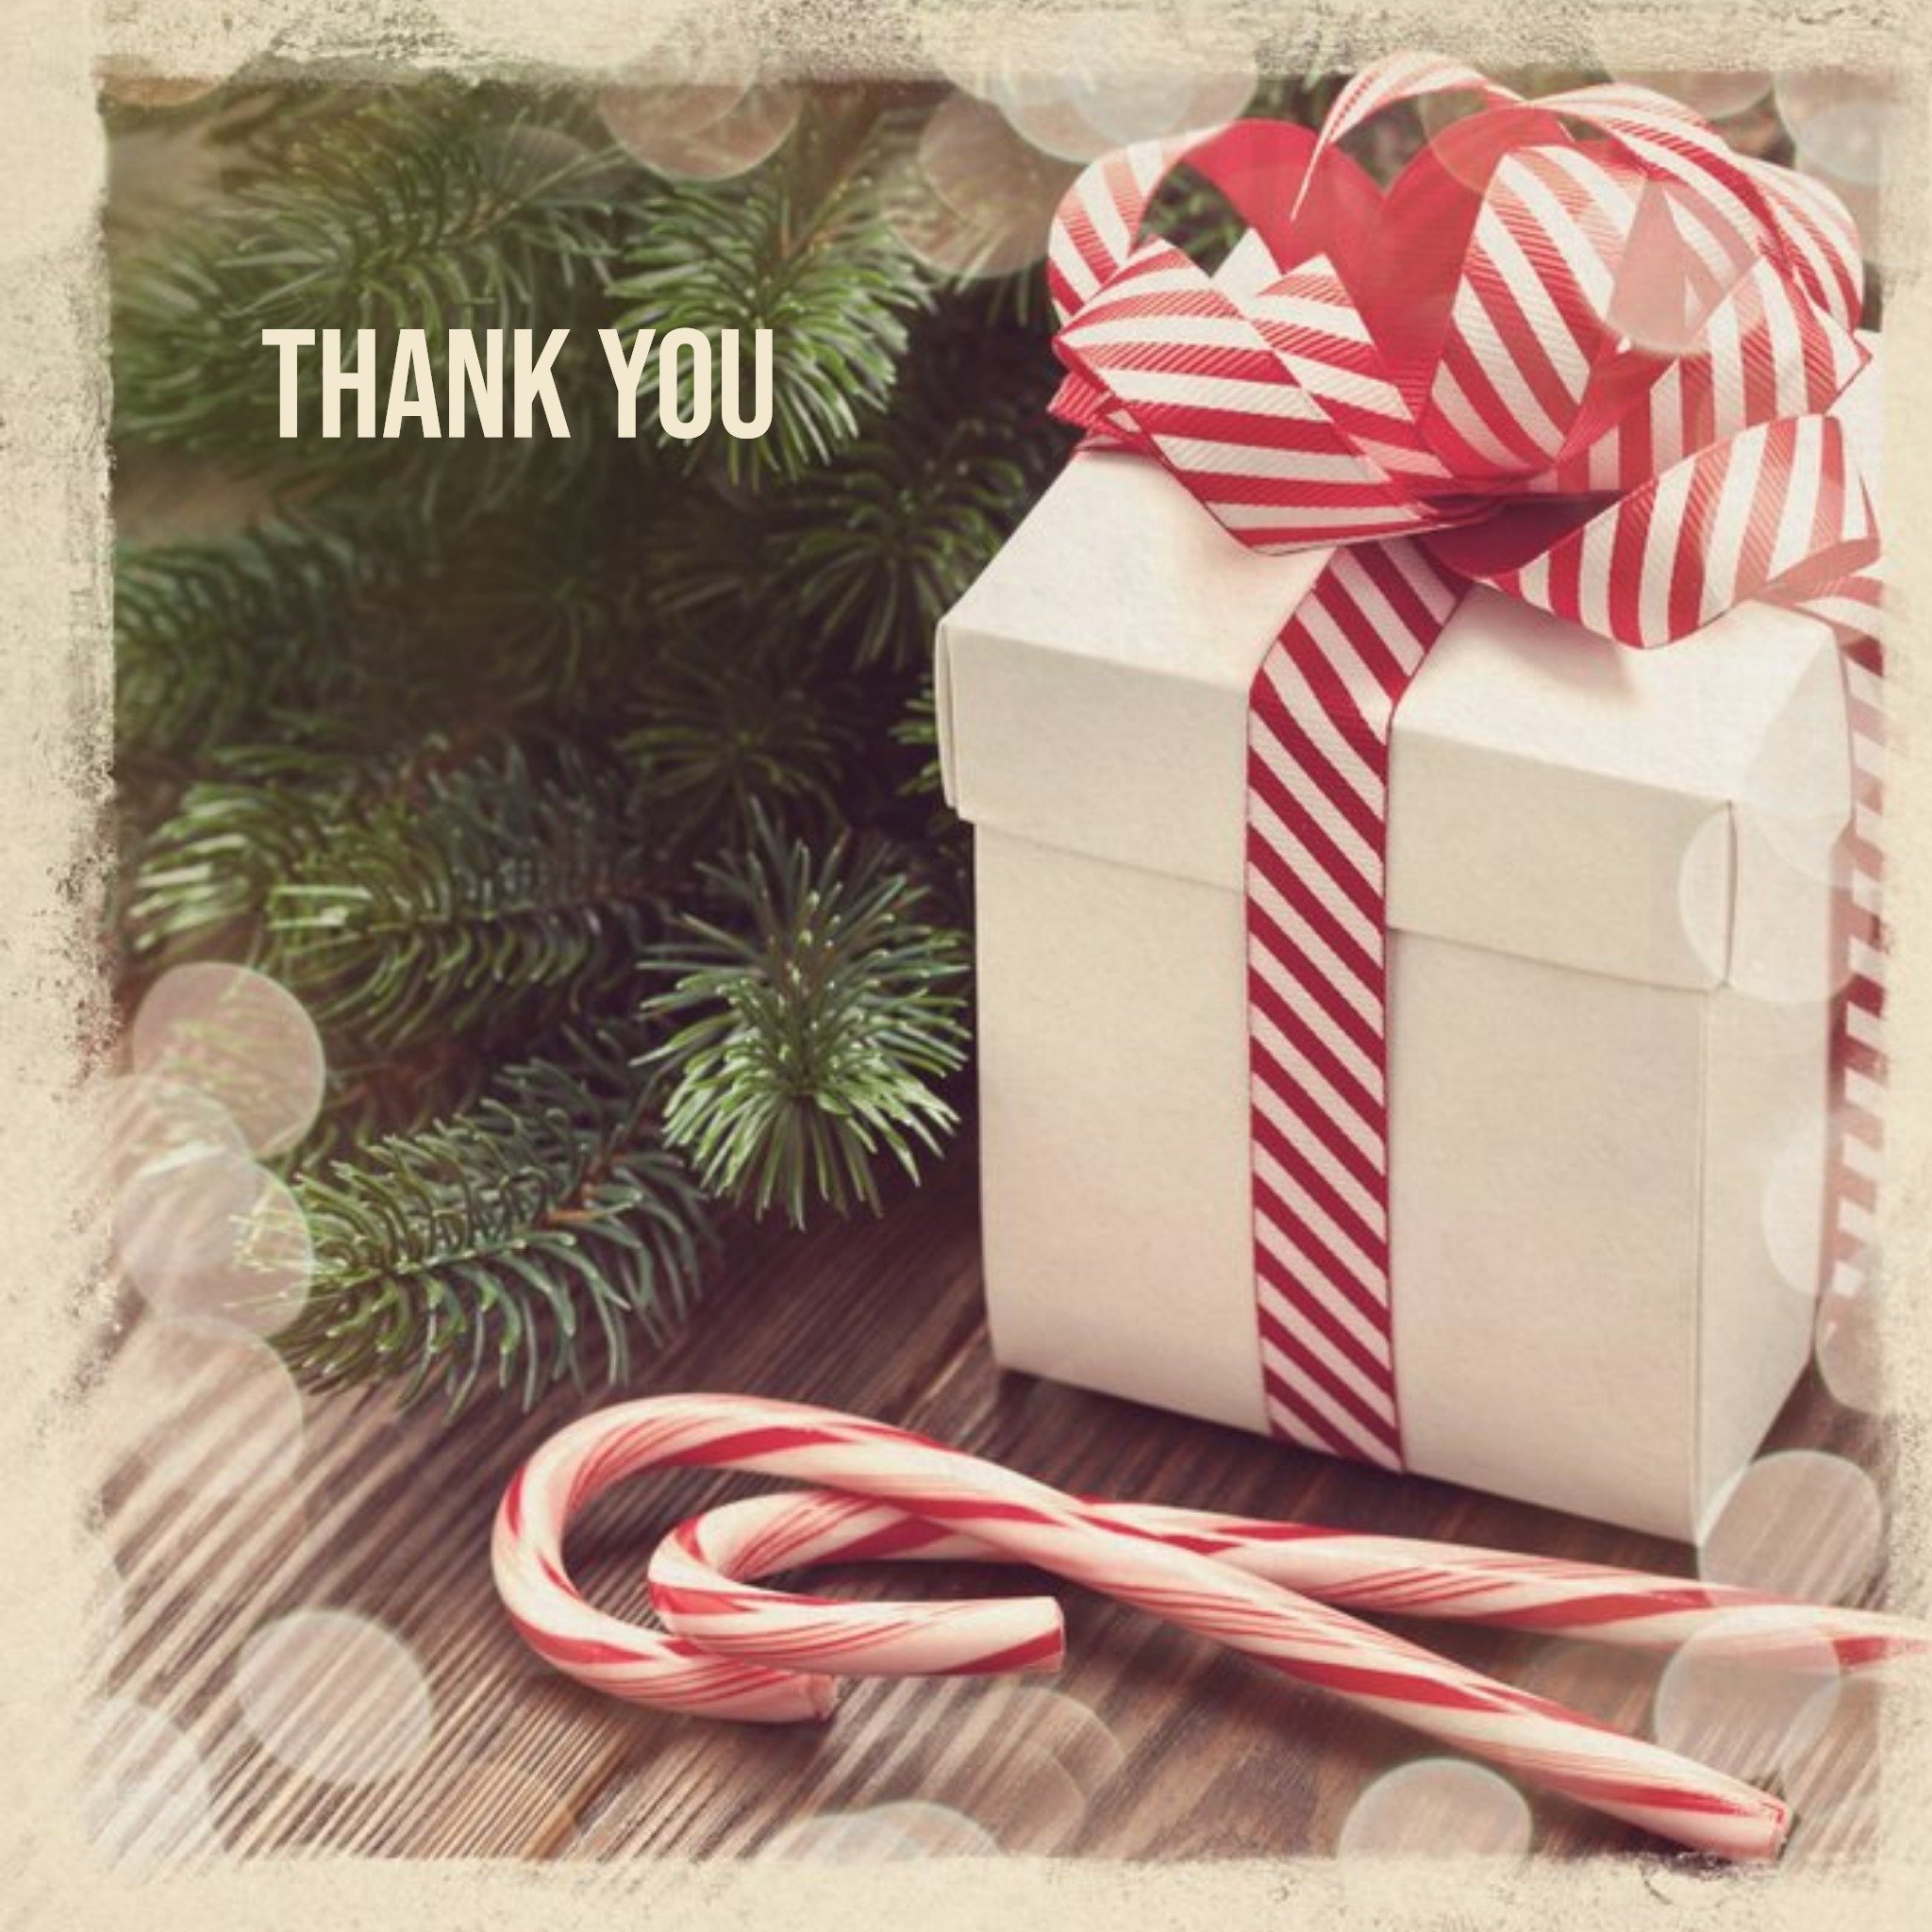 Moonpig Present And Candy Canes Personalised Christmas Thank You Card, Square